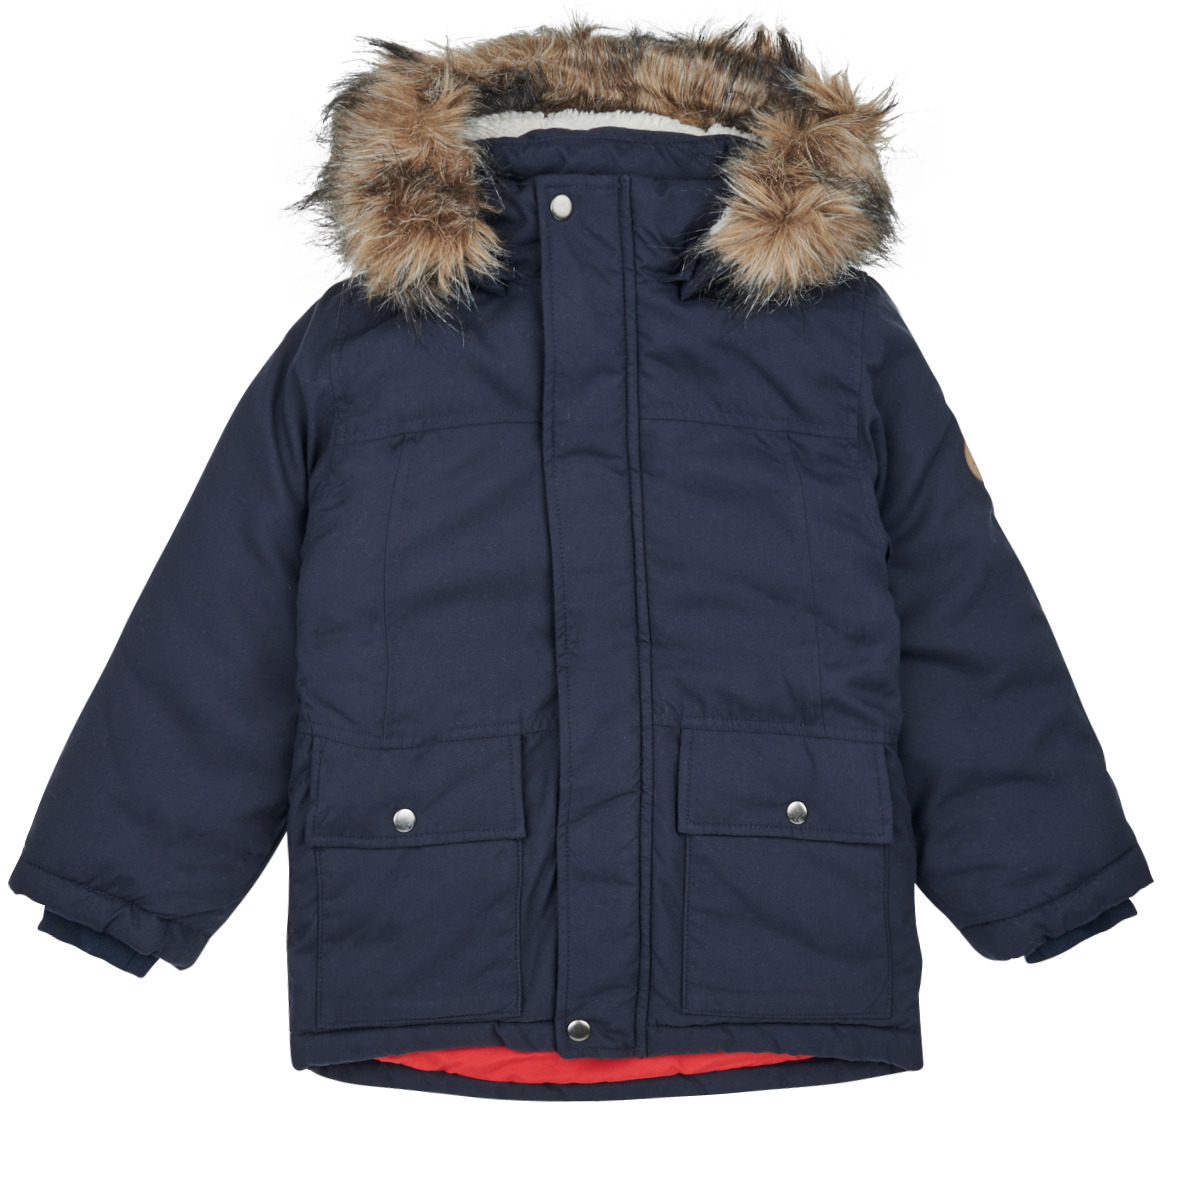 SOUTH NKMMARLIN | it Marine Parkas NET Clothing ! Name Child - PB Free JACKET - Spartoo PARKA delivery